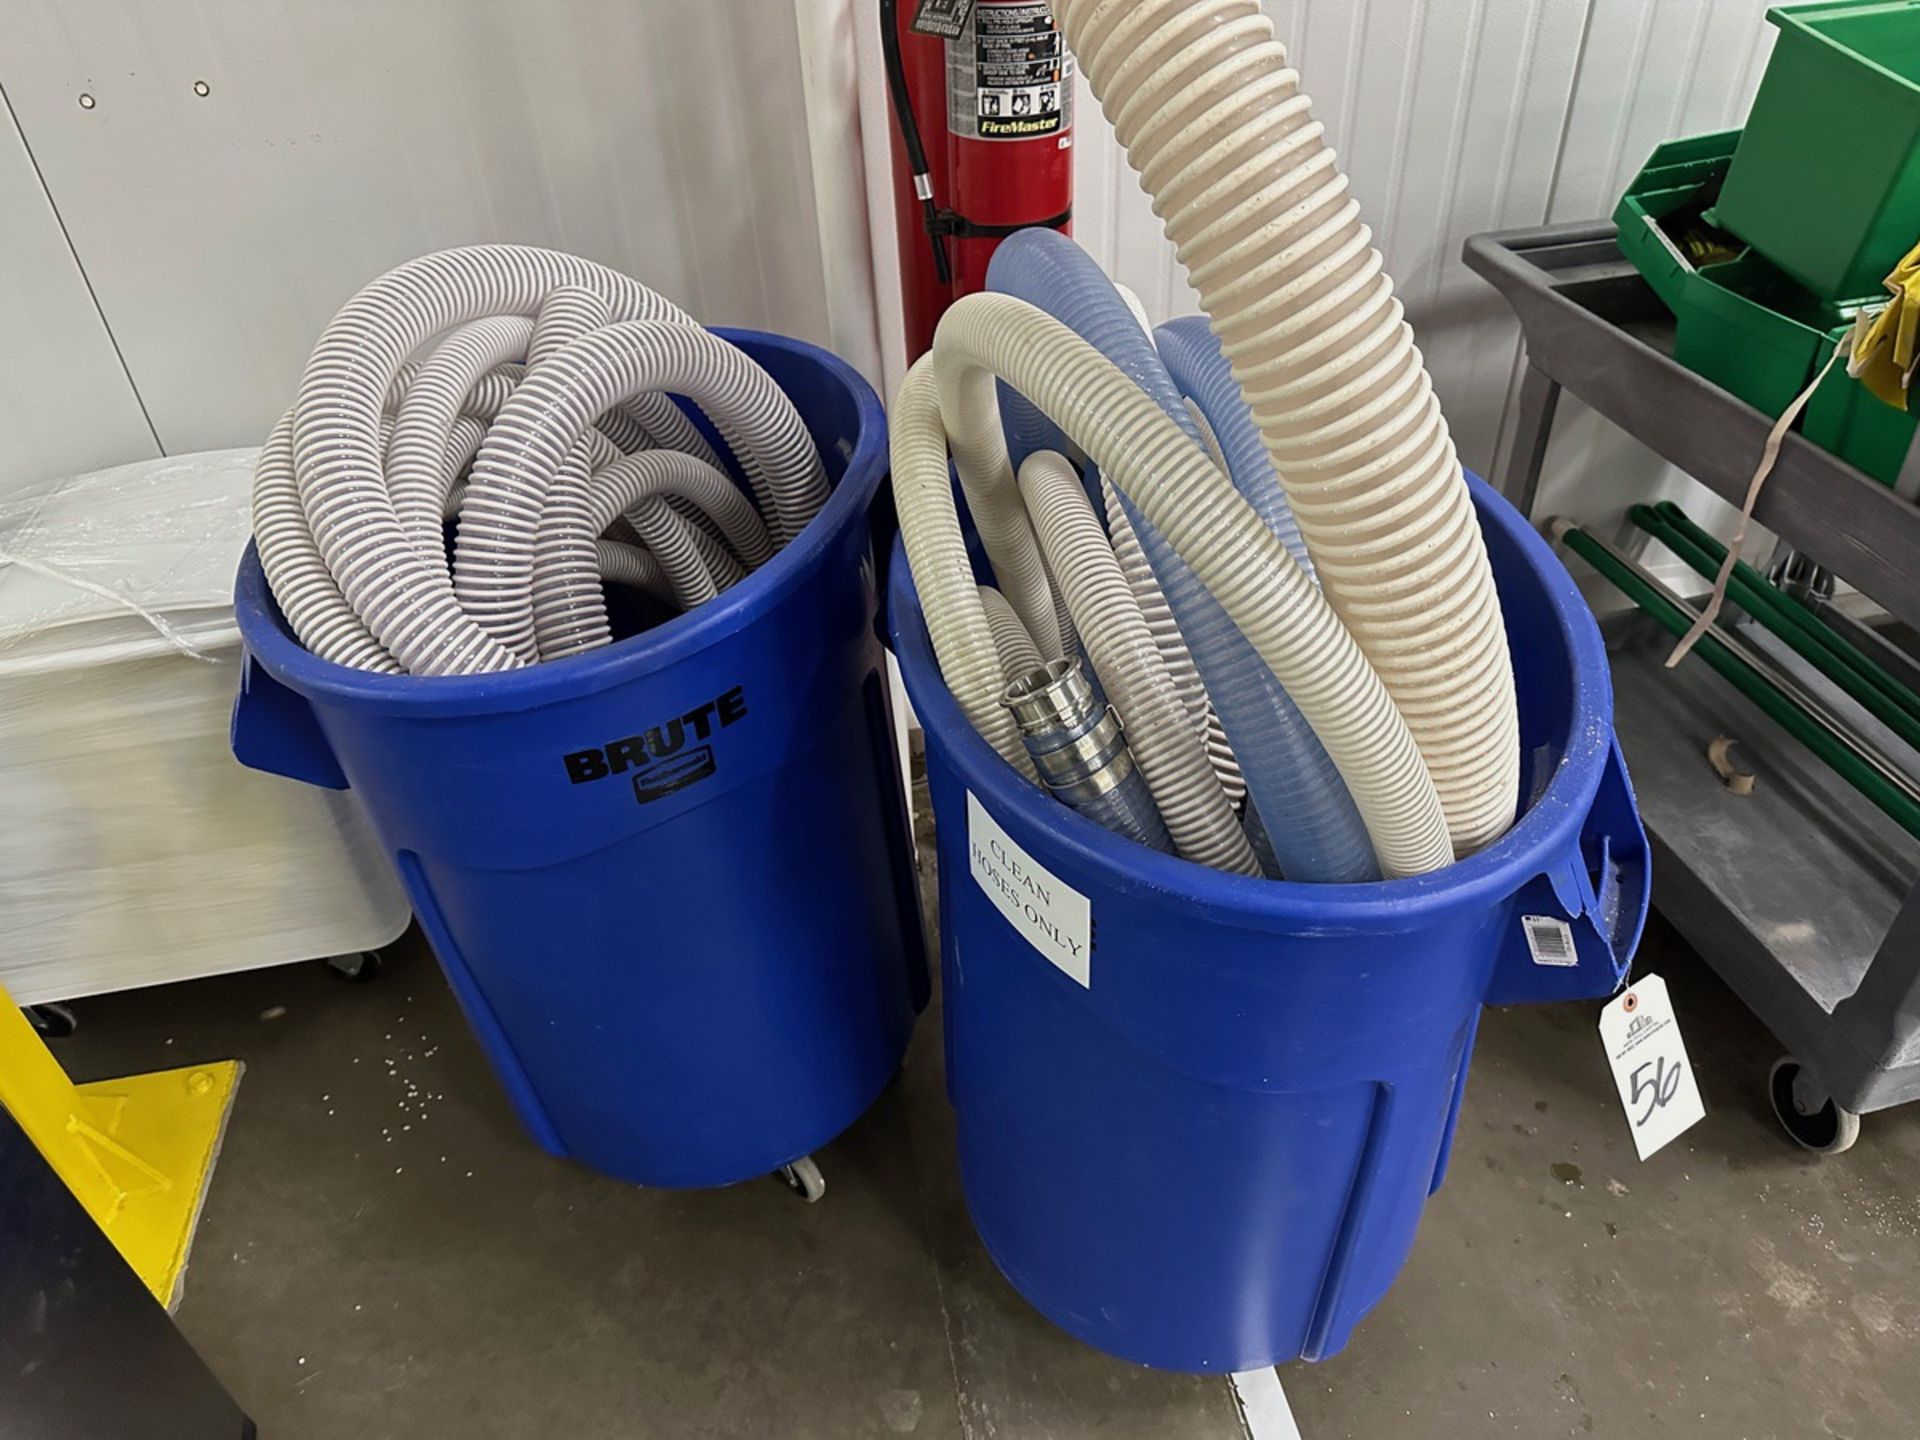 Lot of Assorted Hoses with Rubbermaid Brute Cans on Casters | Rig Fee $35